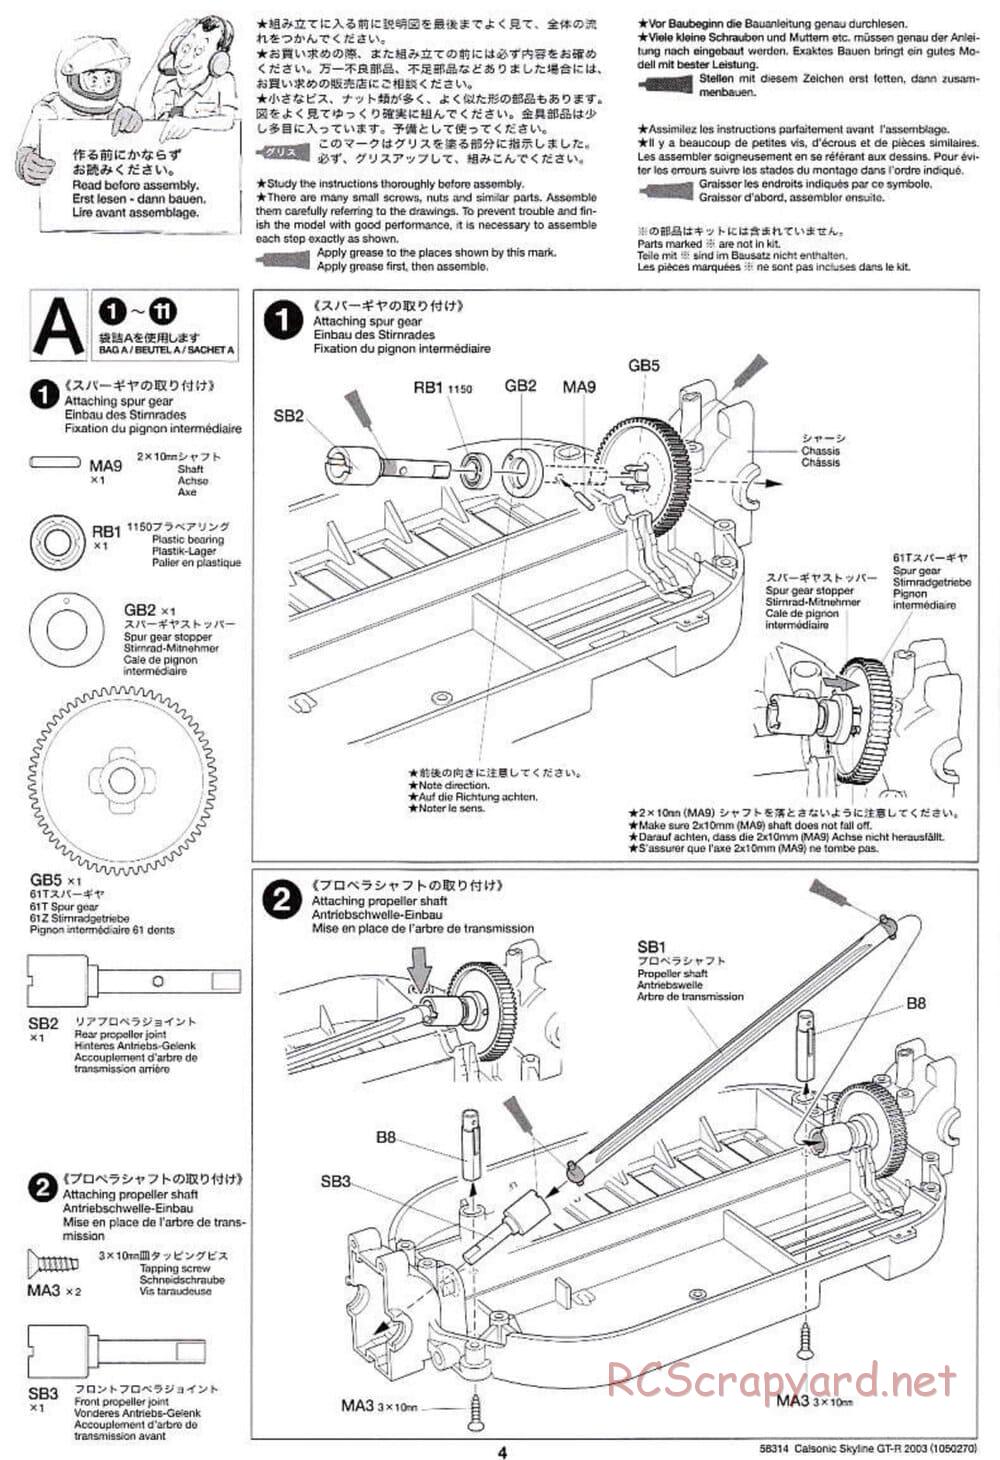 Tamiya - Calsonic Skyline GT-R 2003 - TT-01 Chassis - Manual - Page 4